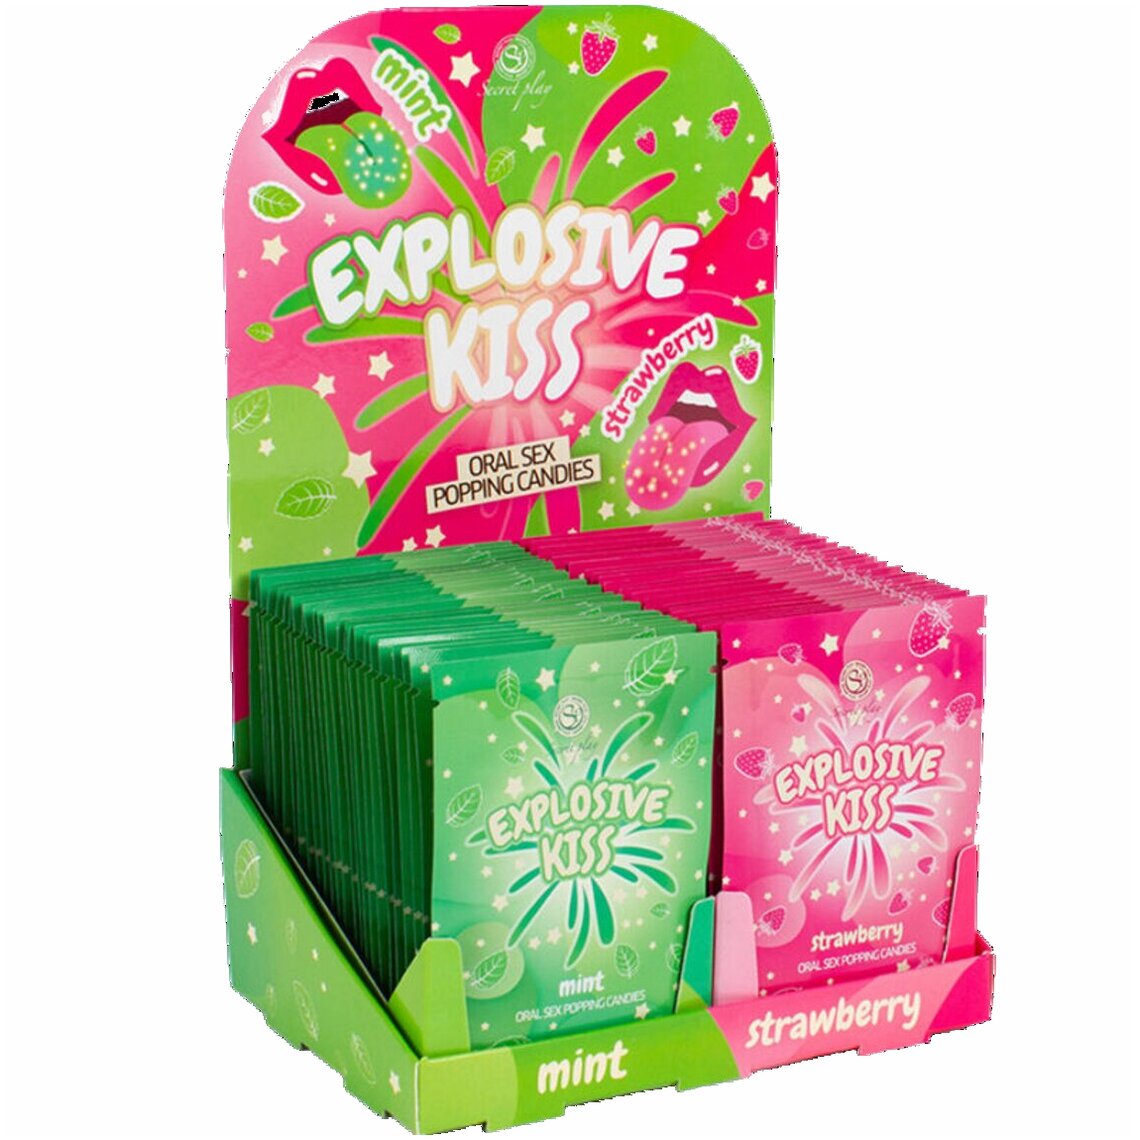 Secret Play Explosive Candy Display 48 Units Sex Candies 6853